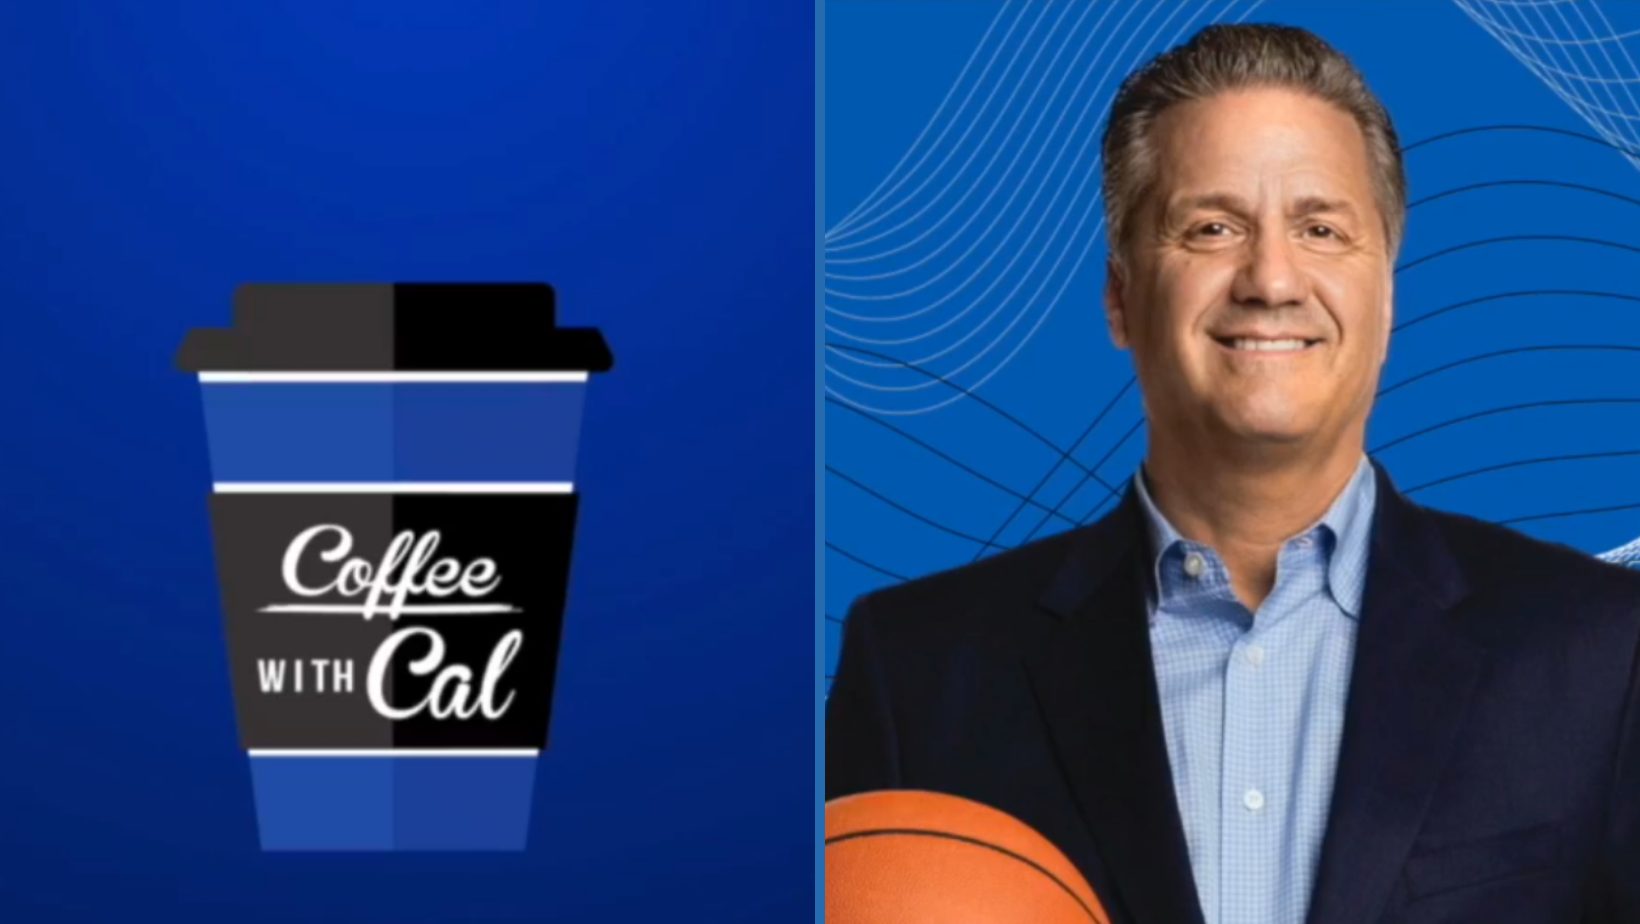 The Calipari Foundation donates $75,000 to Blessings in a Backpack